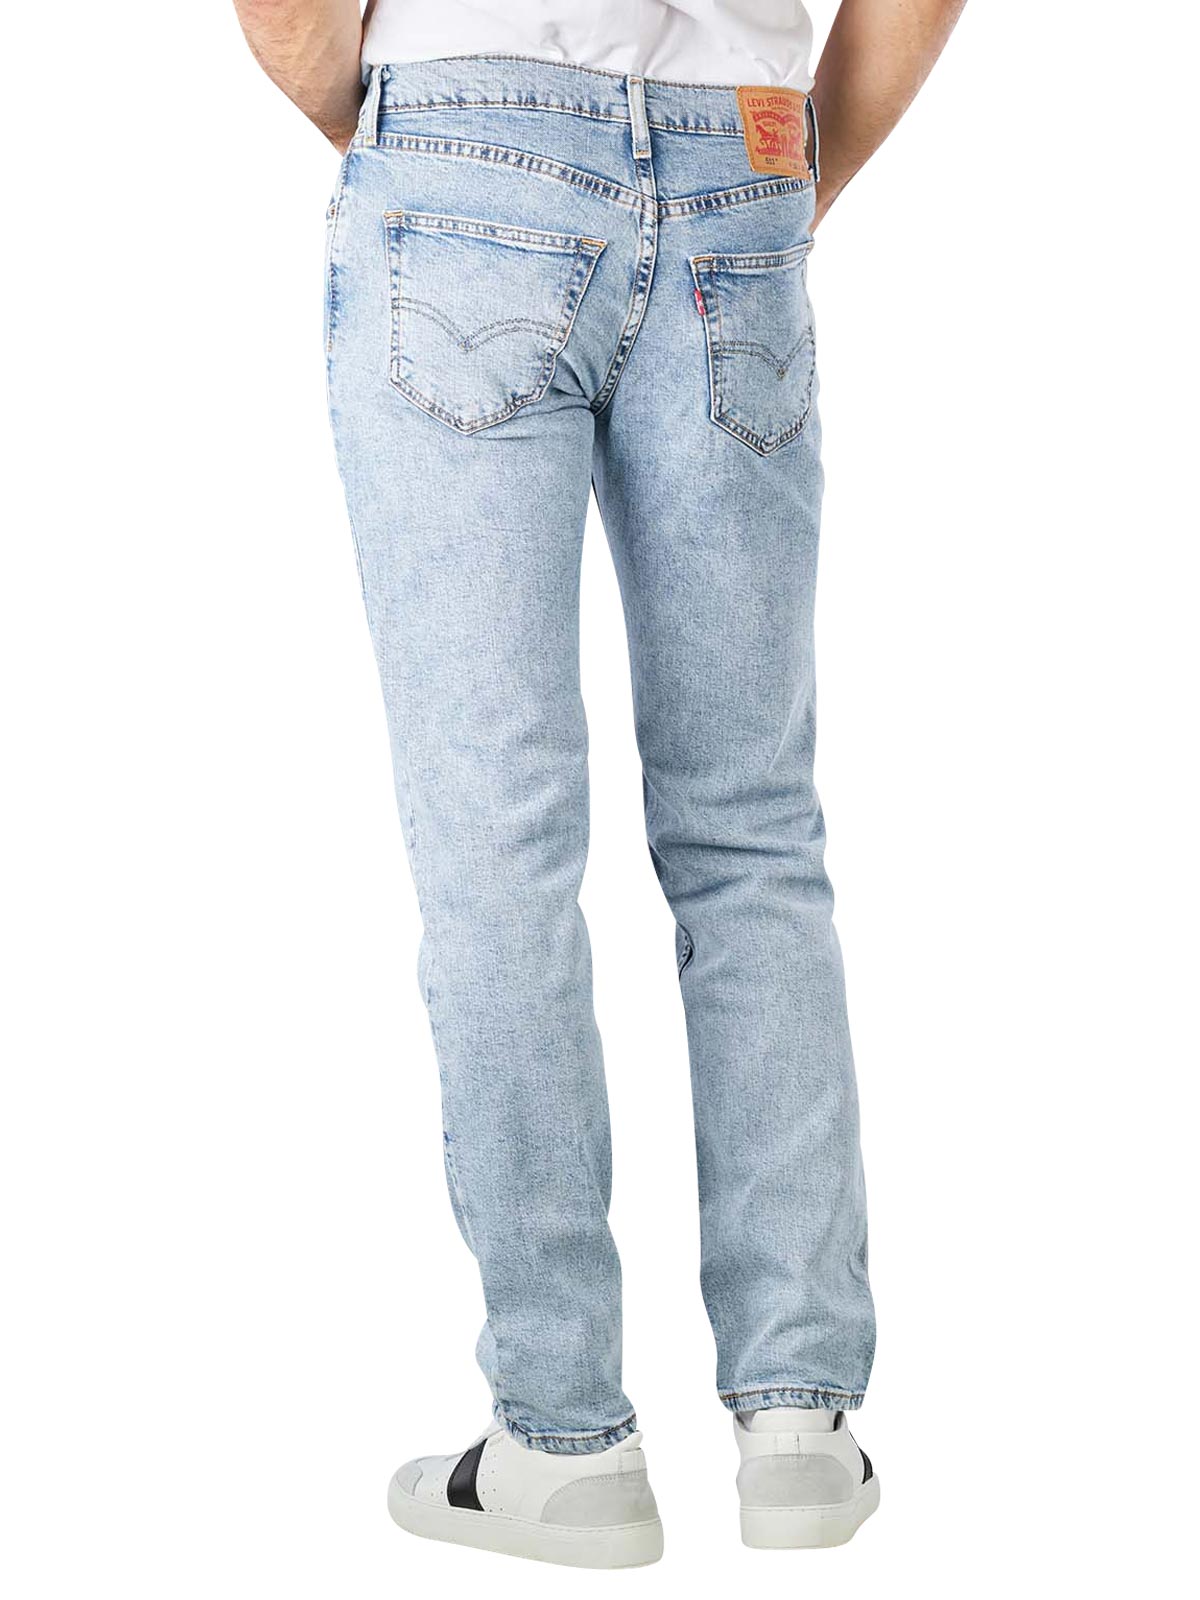 Levi's 511 Jeans Slim Fit Dolf Easy Stone Adv Levi's Men's Jeans | Free  Shipping on  - SIMPLY LOOK GOOD